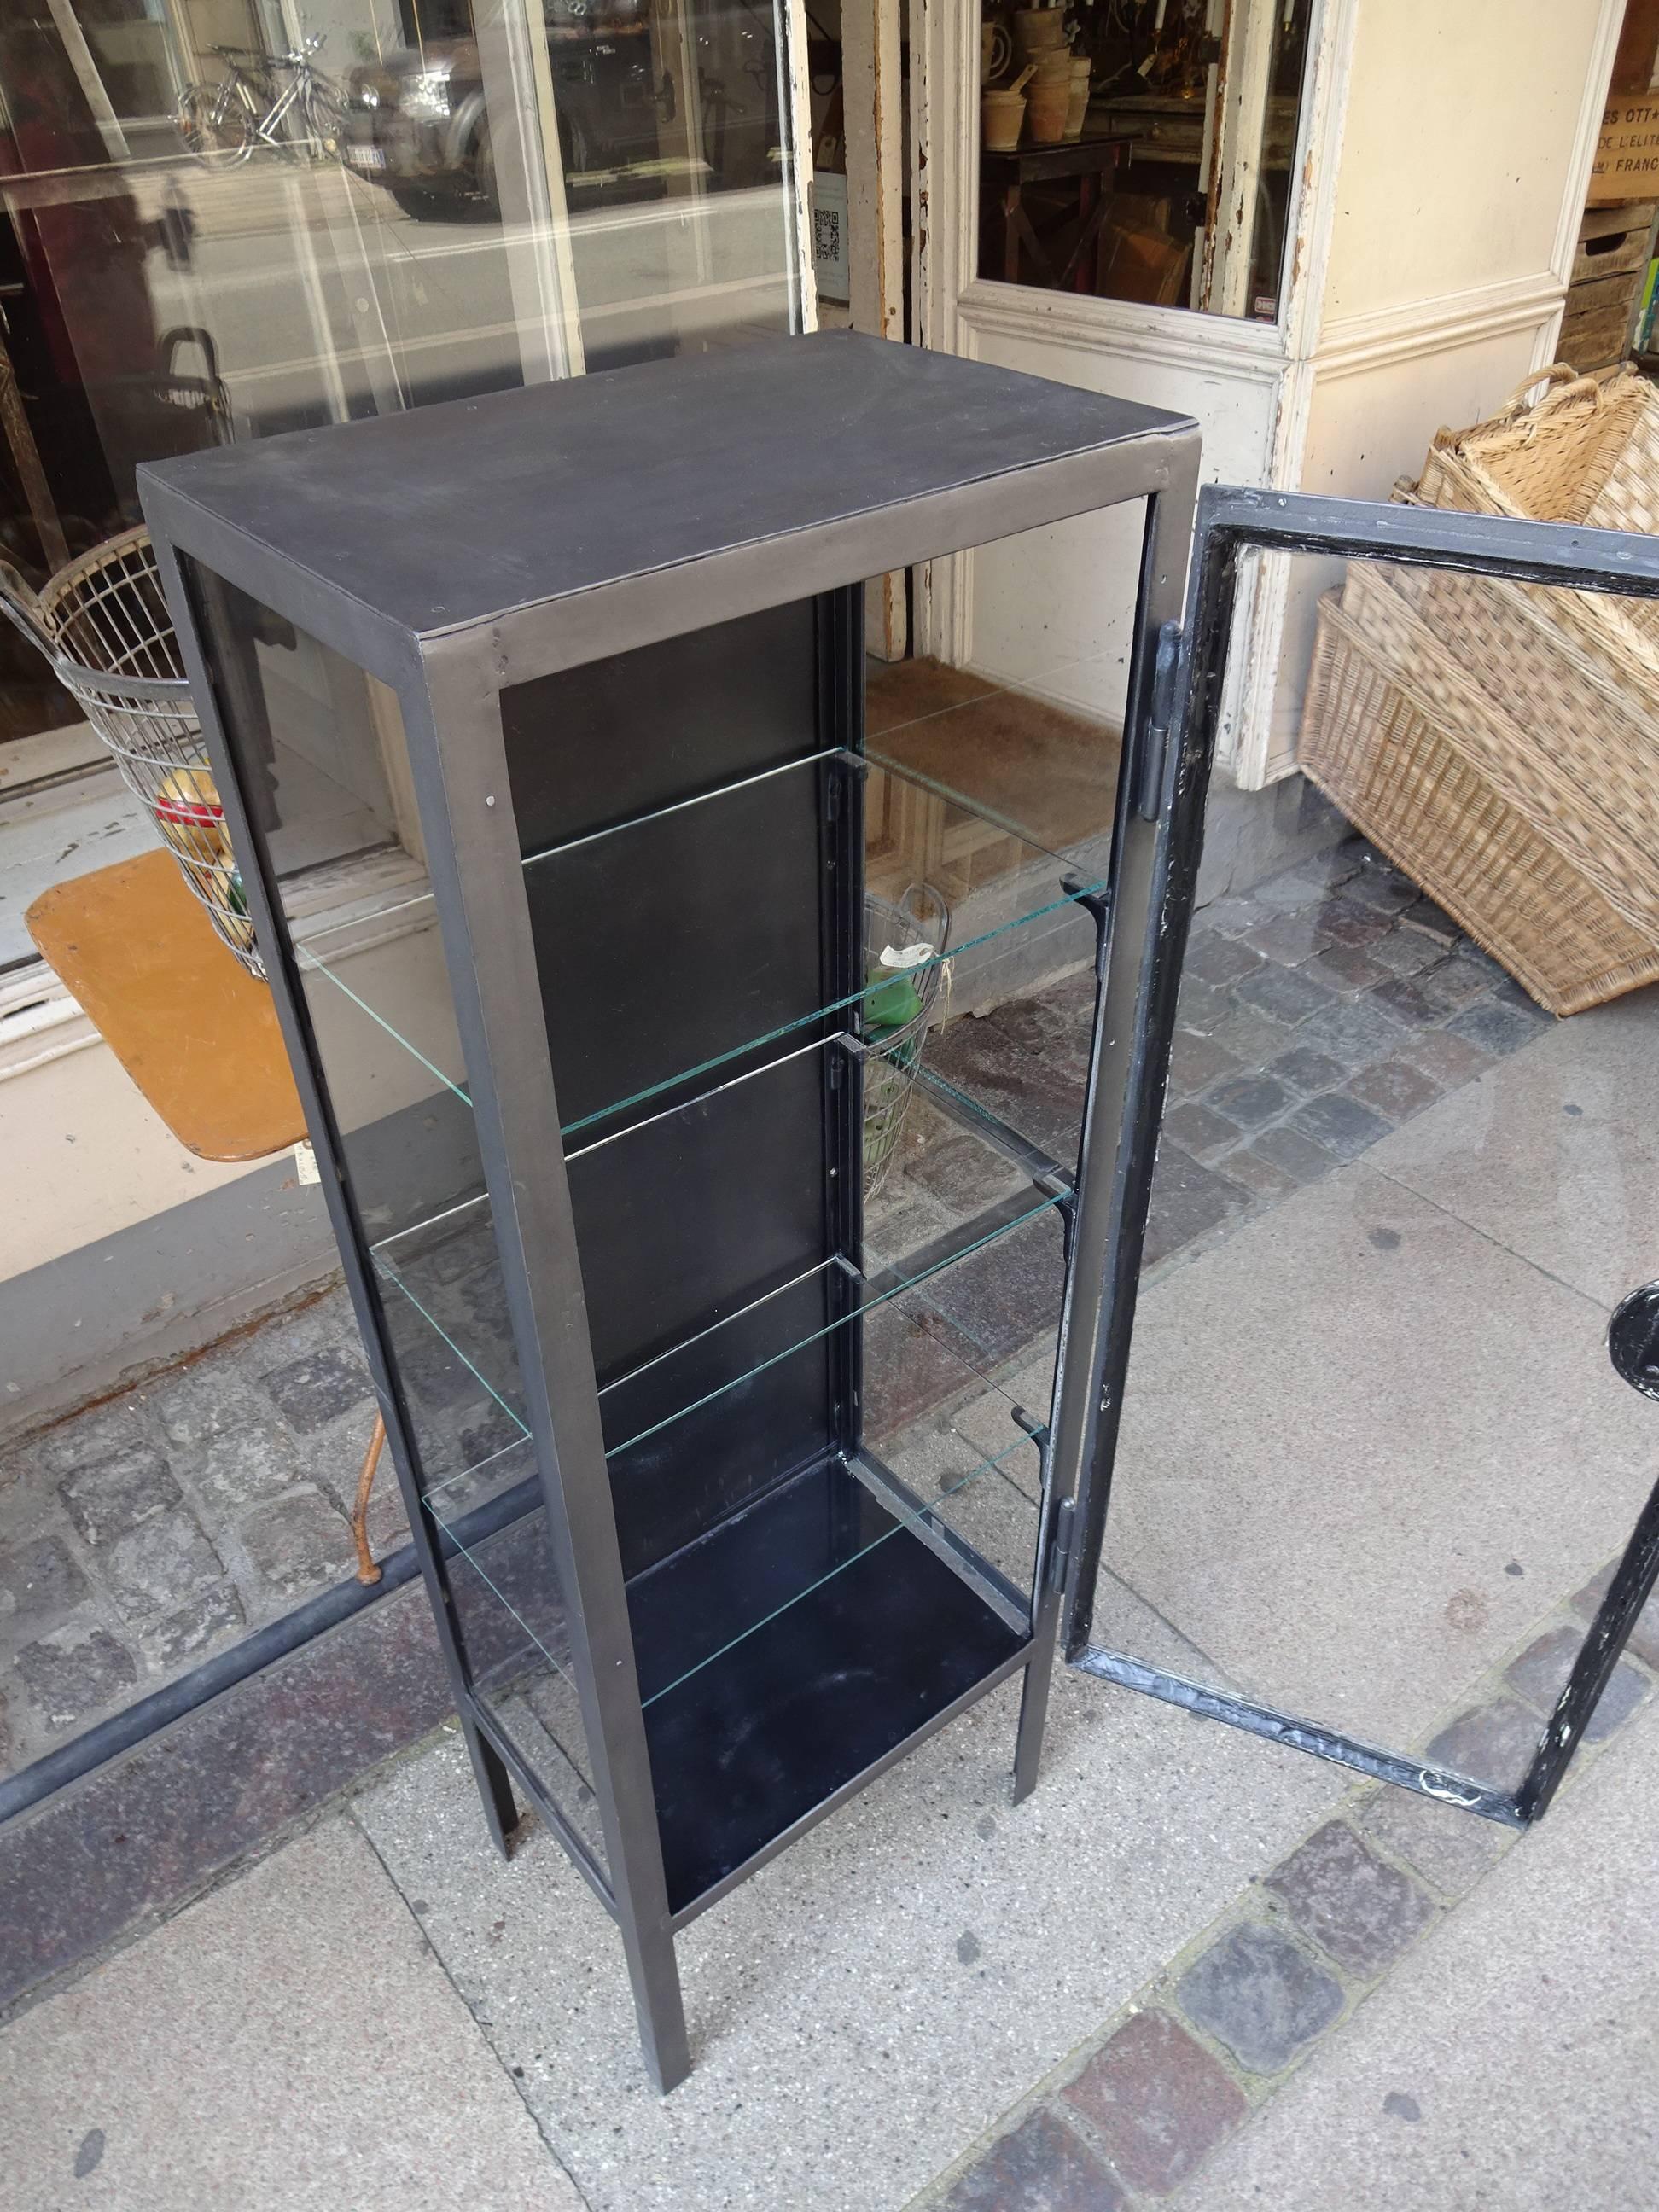 Super vintage French metal display cabinet, originally used for storage in a doctor’s practise.
This smaller compact cabinet is treated, polished and lacquered, and is not only a handsome item, but also very practical, with the three adjustable